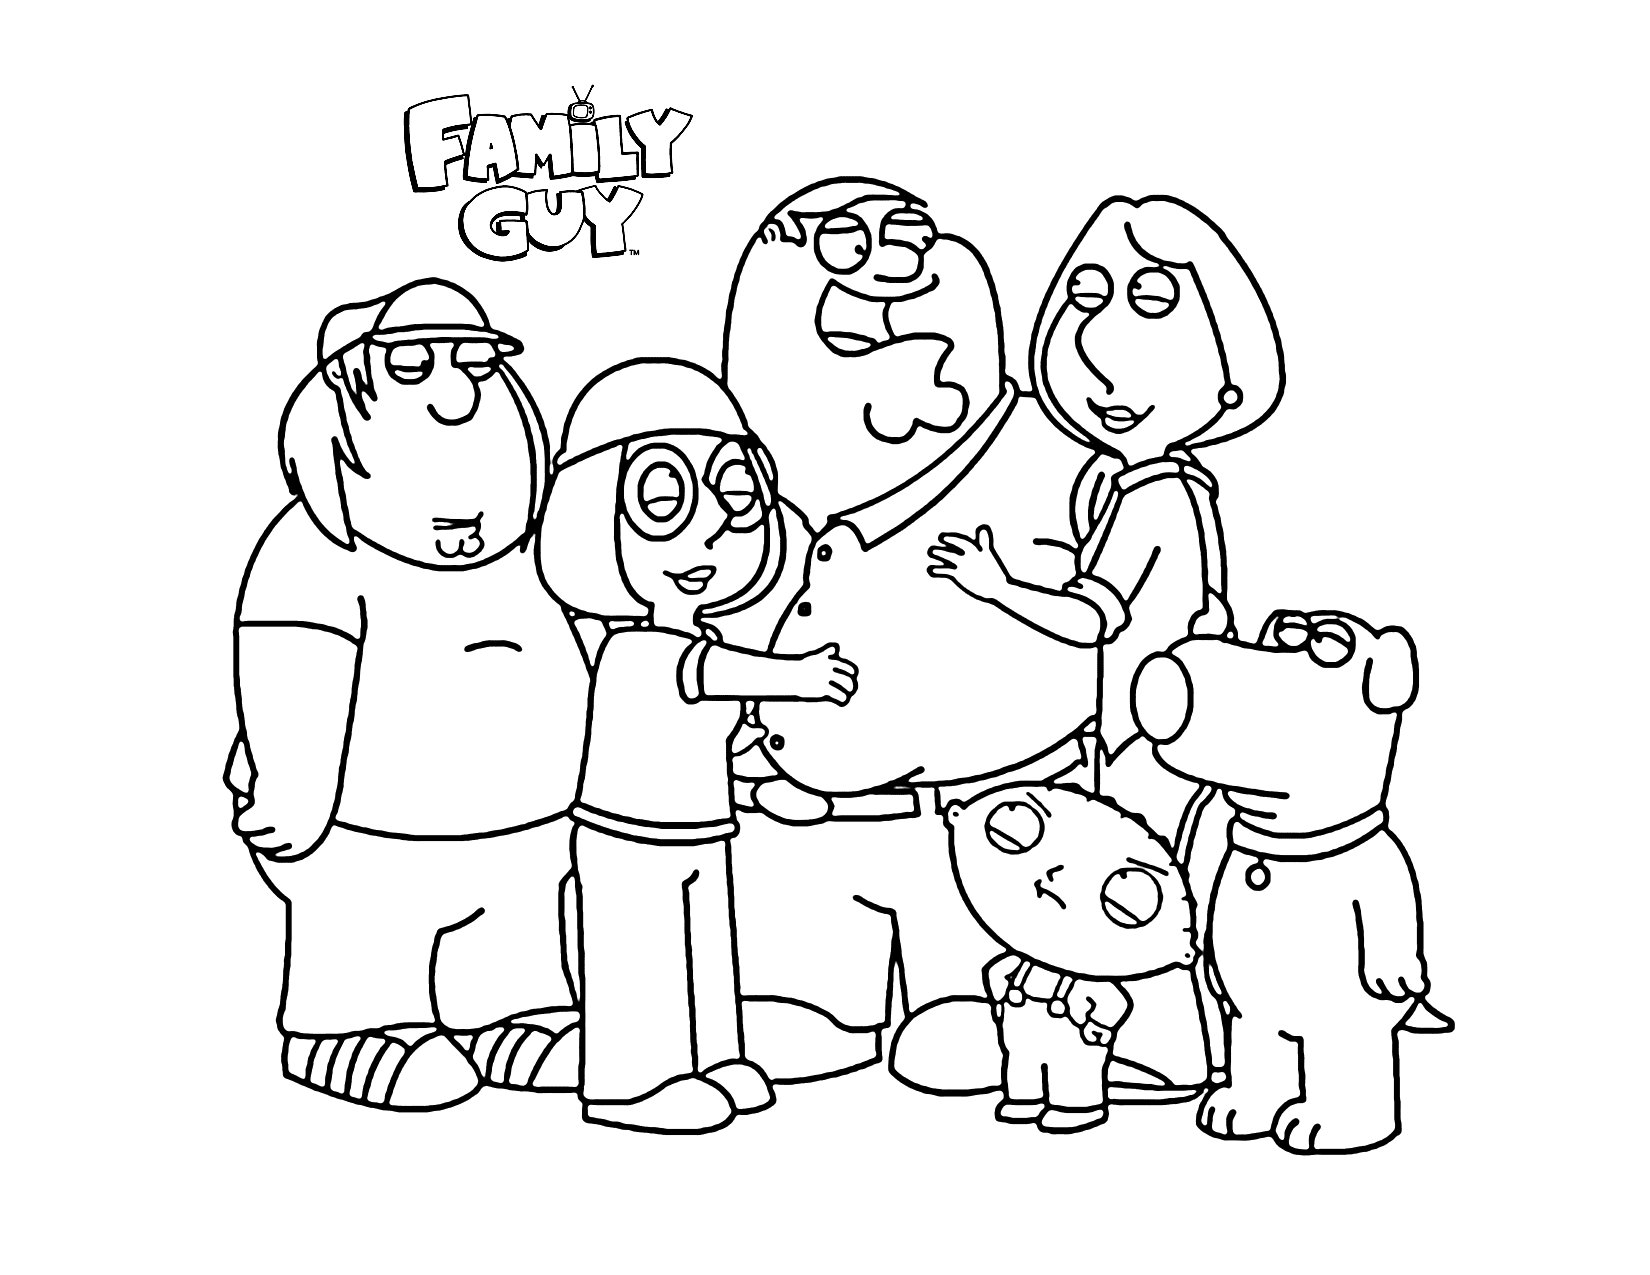 Family Guy Portrait Coloring Page